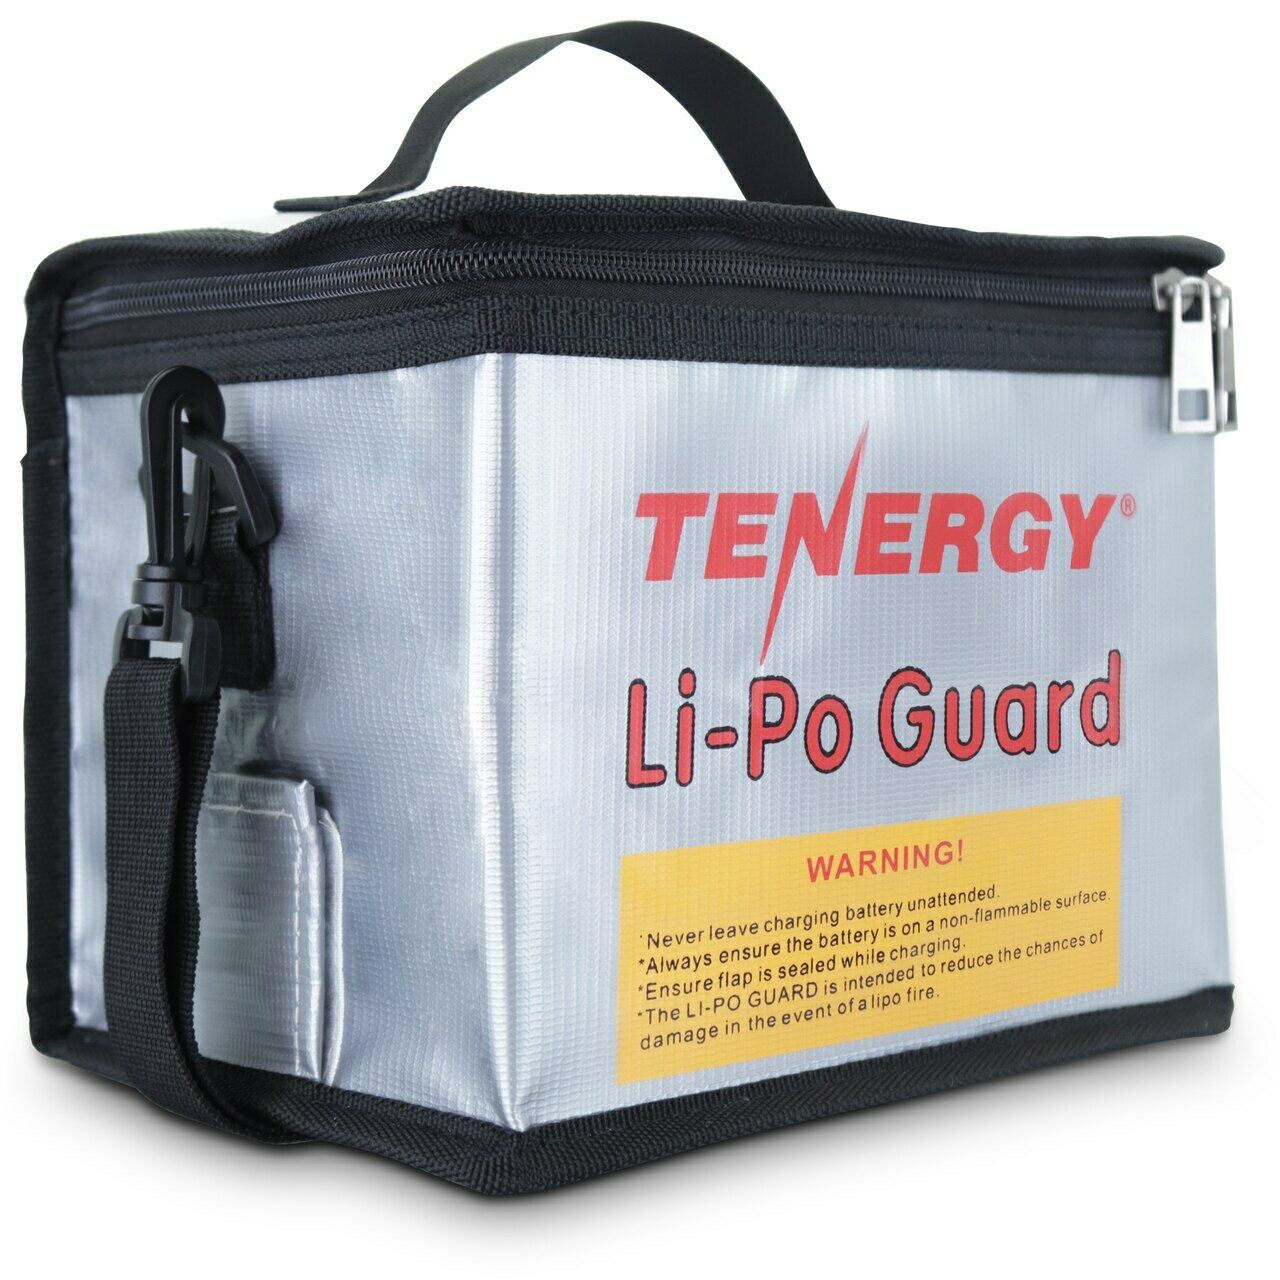 Tenergy Lipo Battery Safe Guard Fireproof Explosionproof Bag For Charge Storage